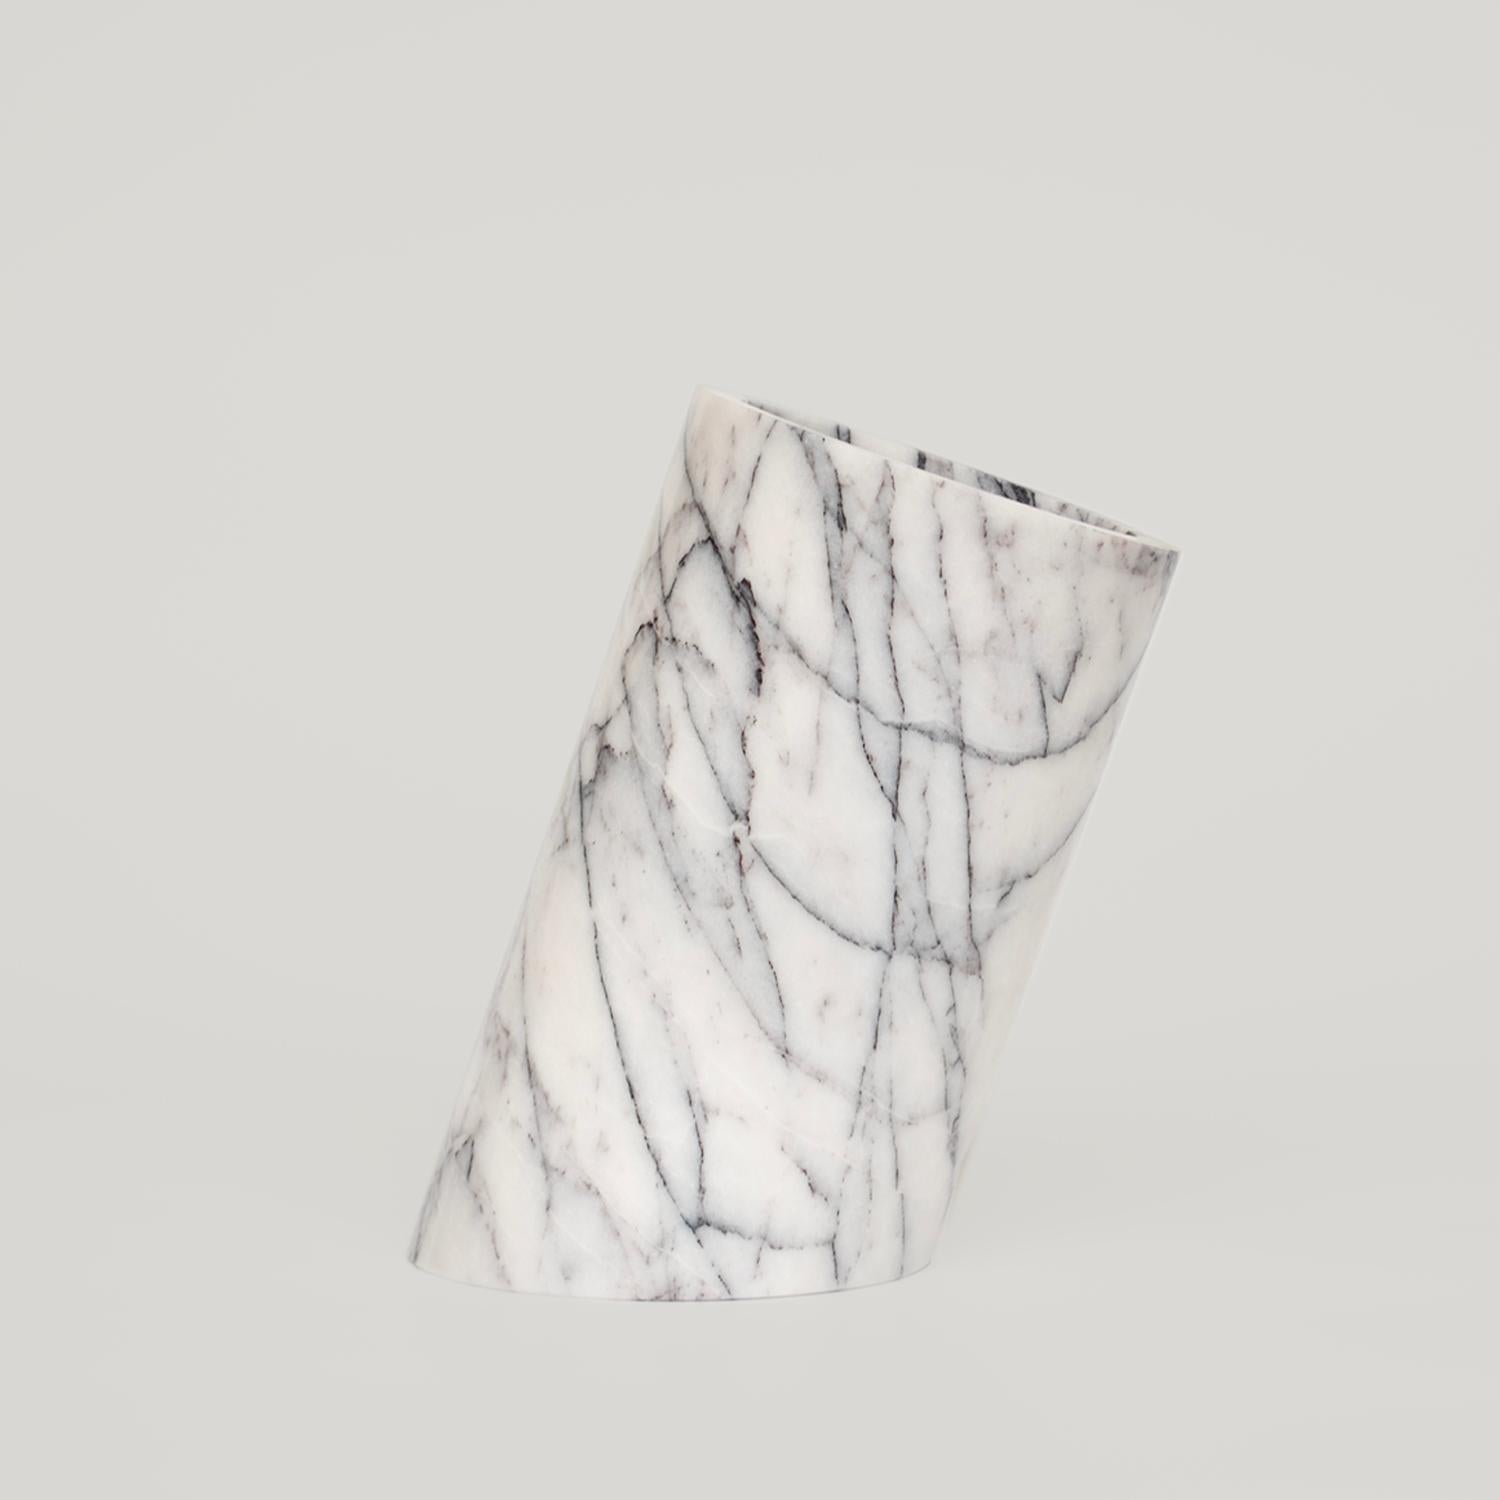 Our wine cooler is designed by us and hand crafted by the artisans within the fair-trade principles.

The natural properties of the marble will keep your wine chilled with no need for ice - you can also place this marble cooler in the fridge for an